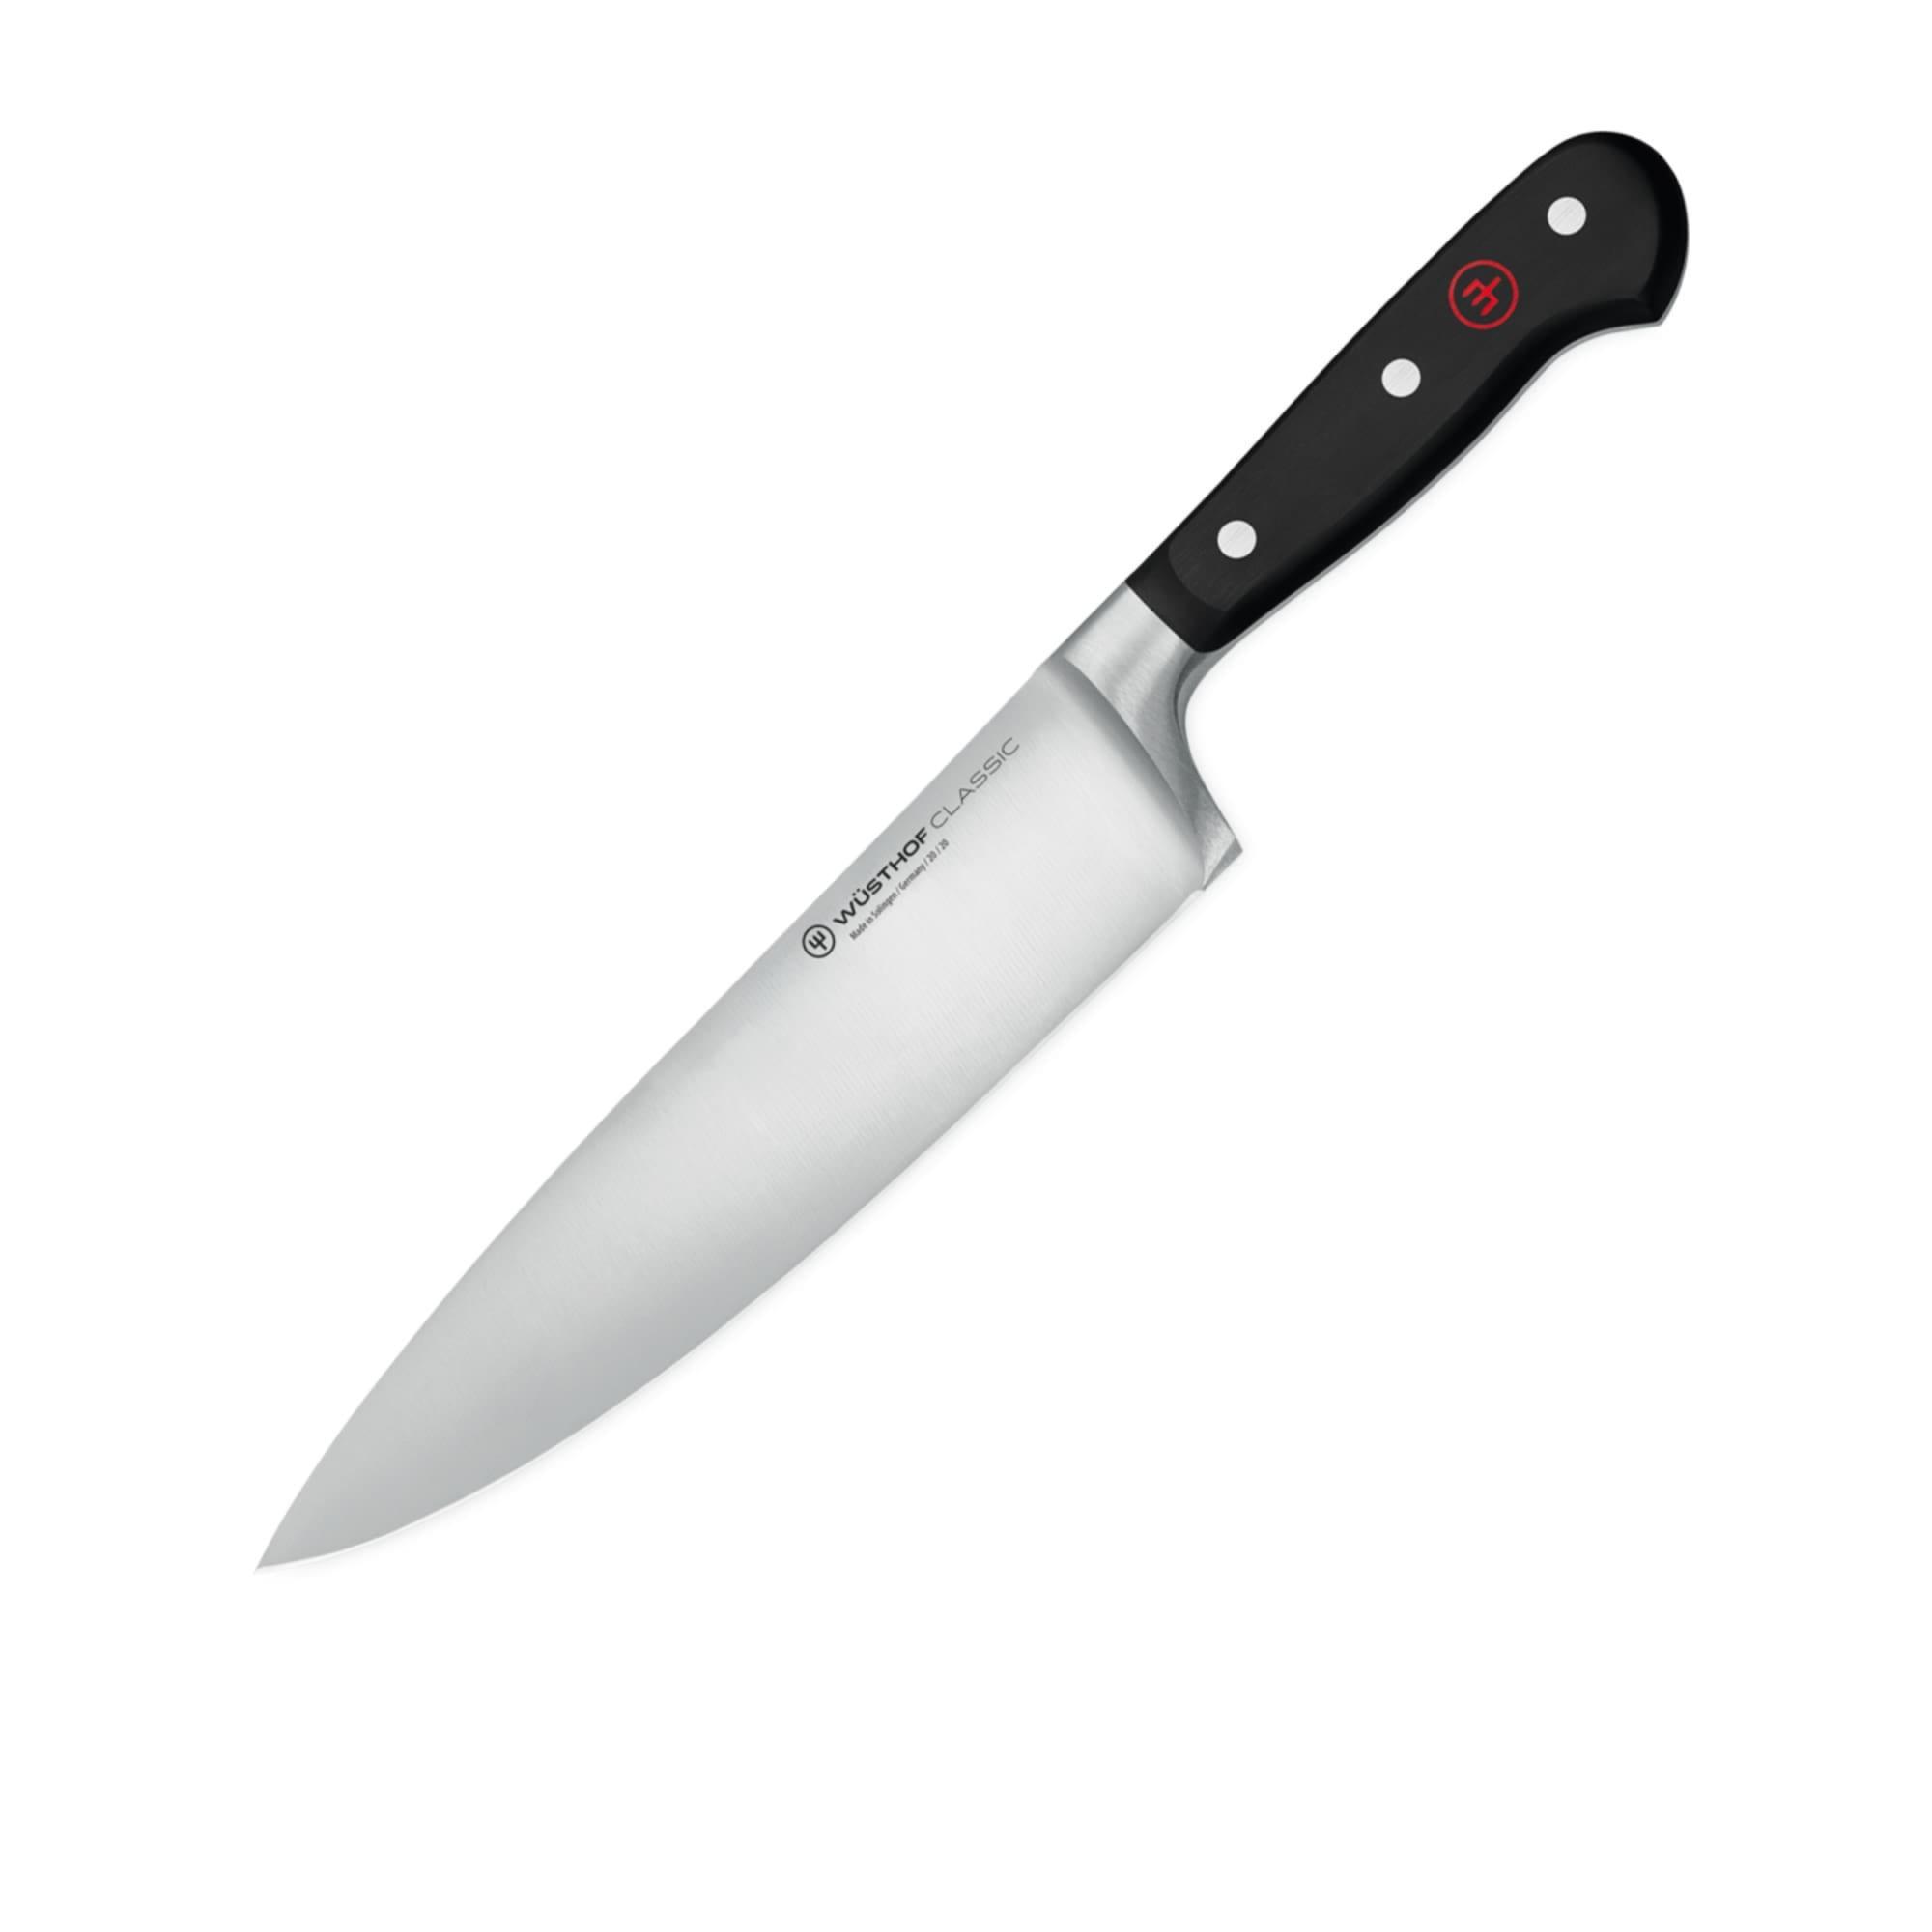 Wusthof Classic Cook's Knife 20cm Image 1